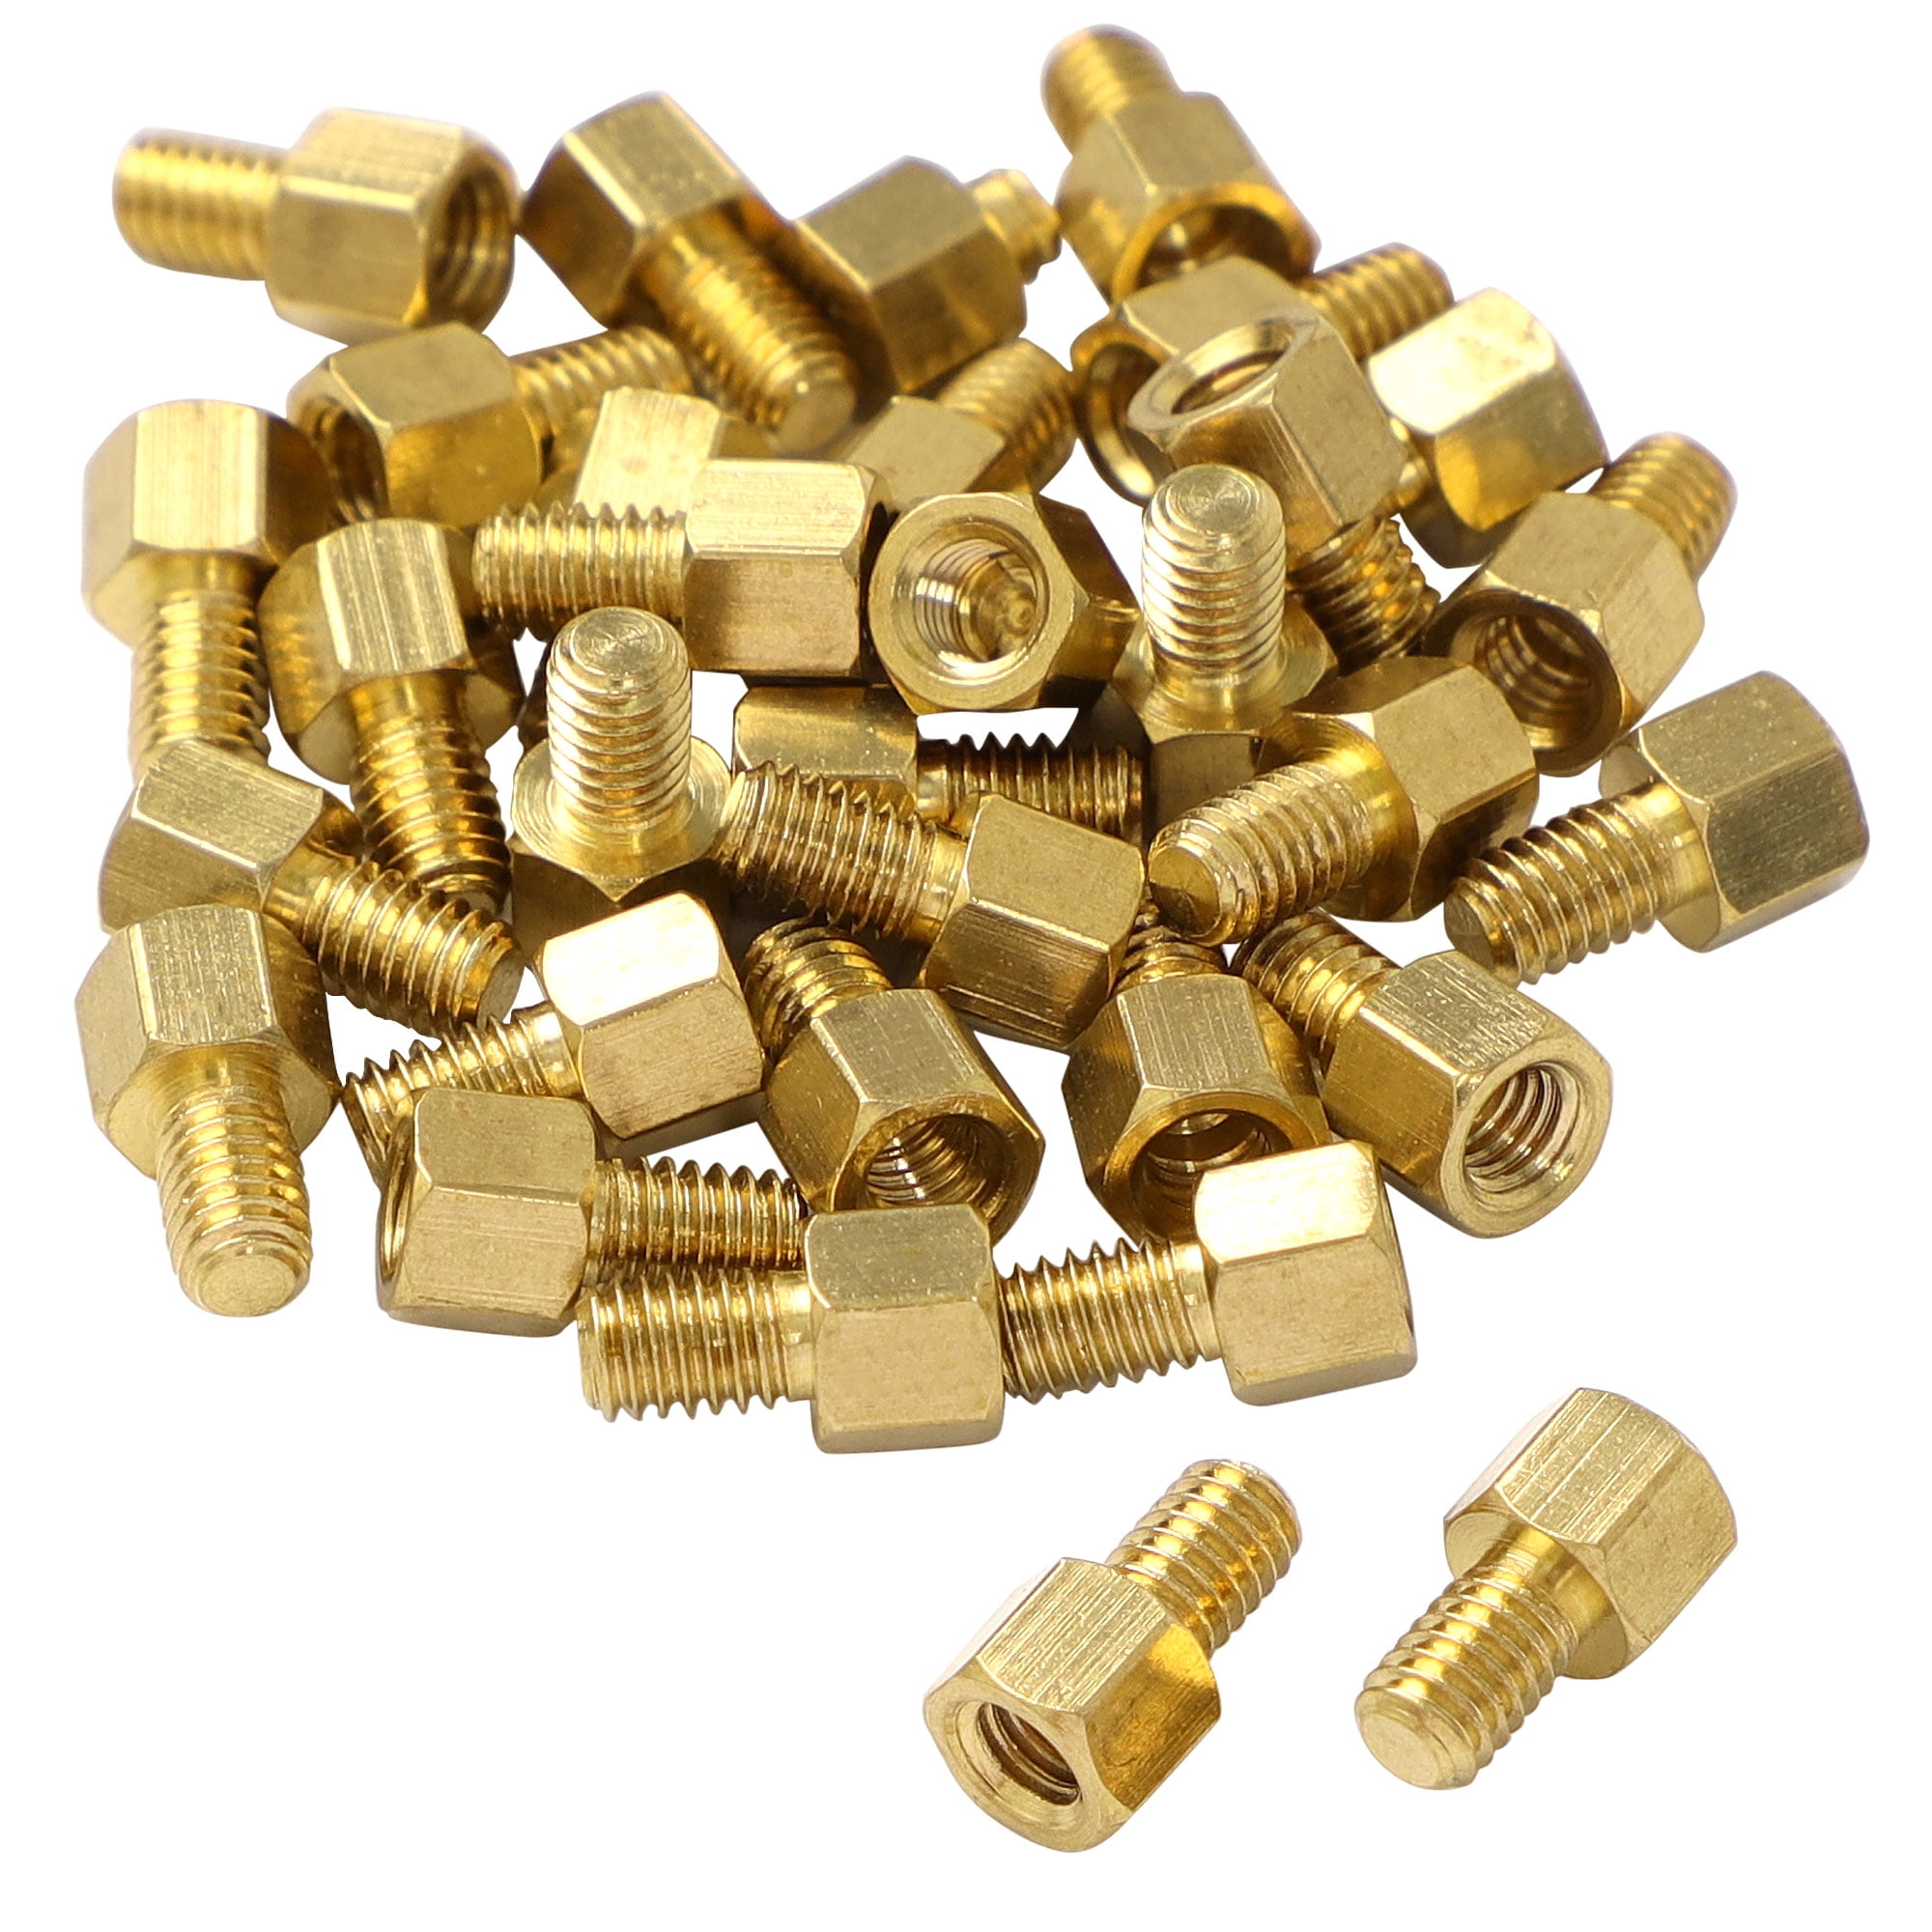 30PCS M4 x 5mm + 6mm Male-Female Thread Brass Spacer Standoff Hexagonal Hex  Standoff Spacer for DIY Computer Build, Electronic Projects 